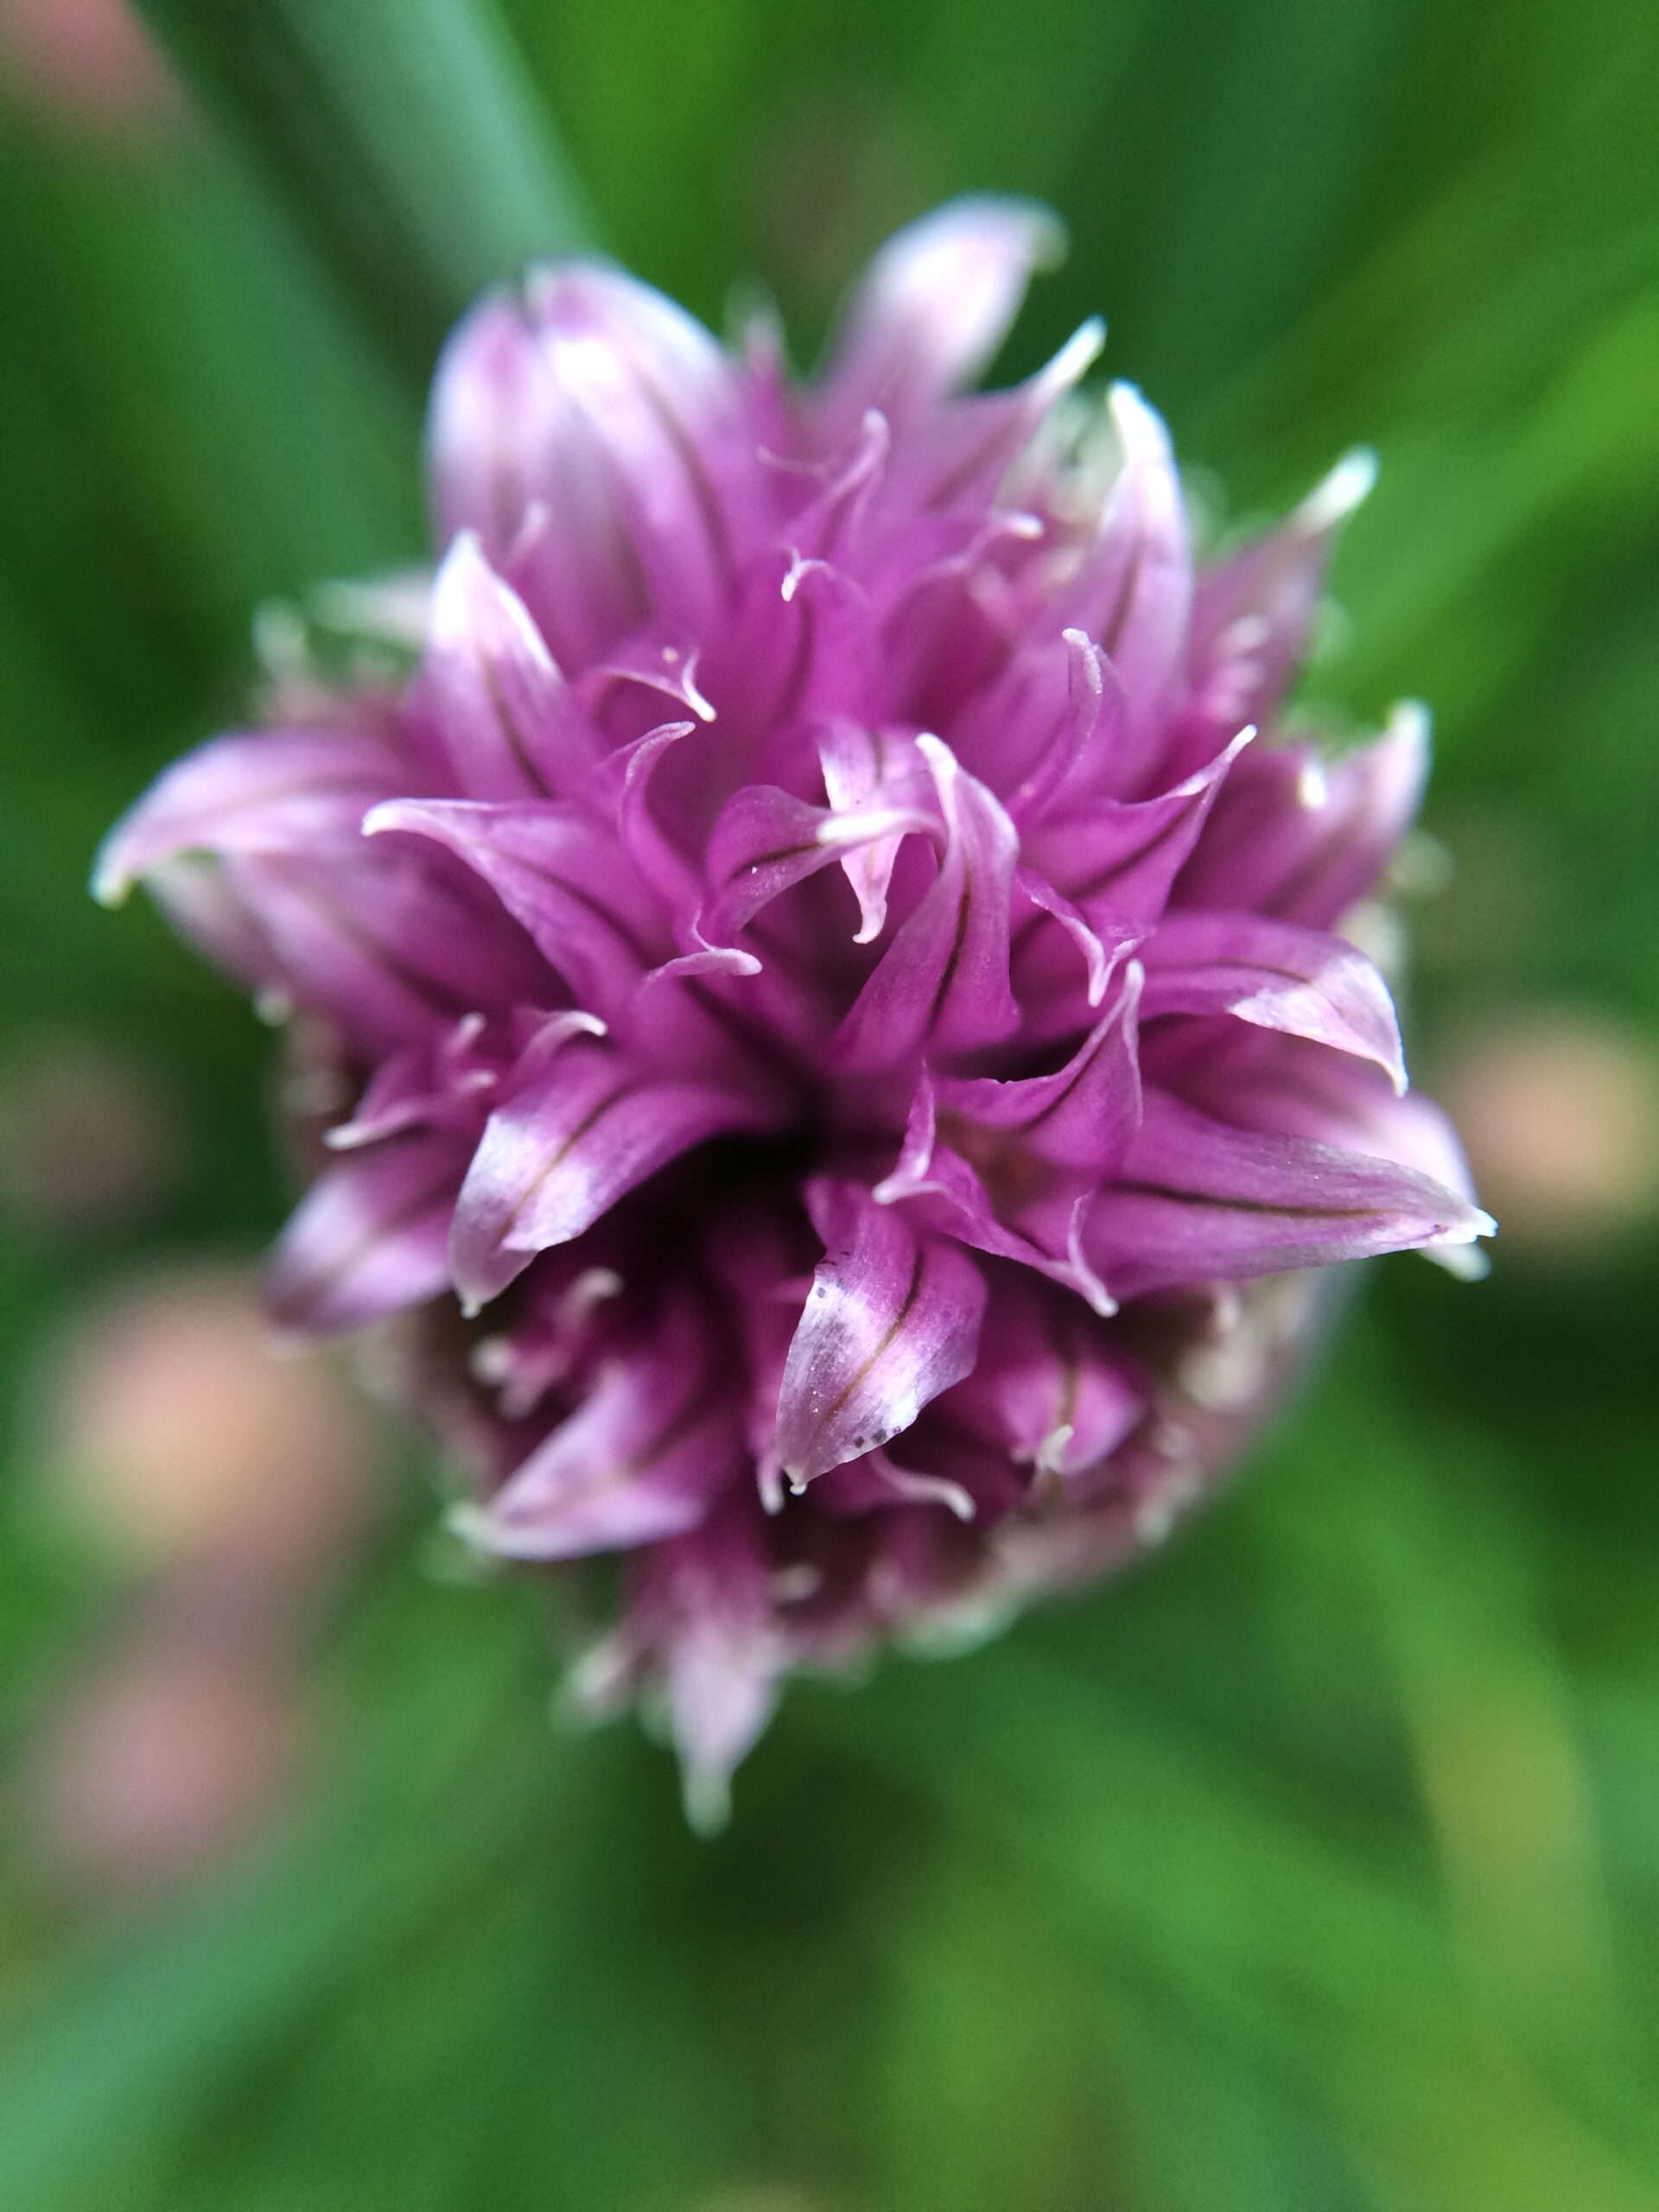 Chive flower in spring